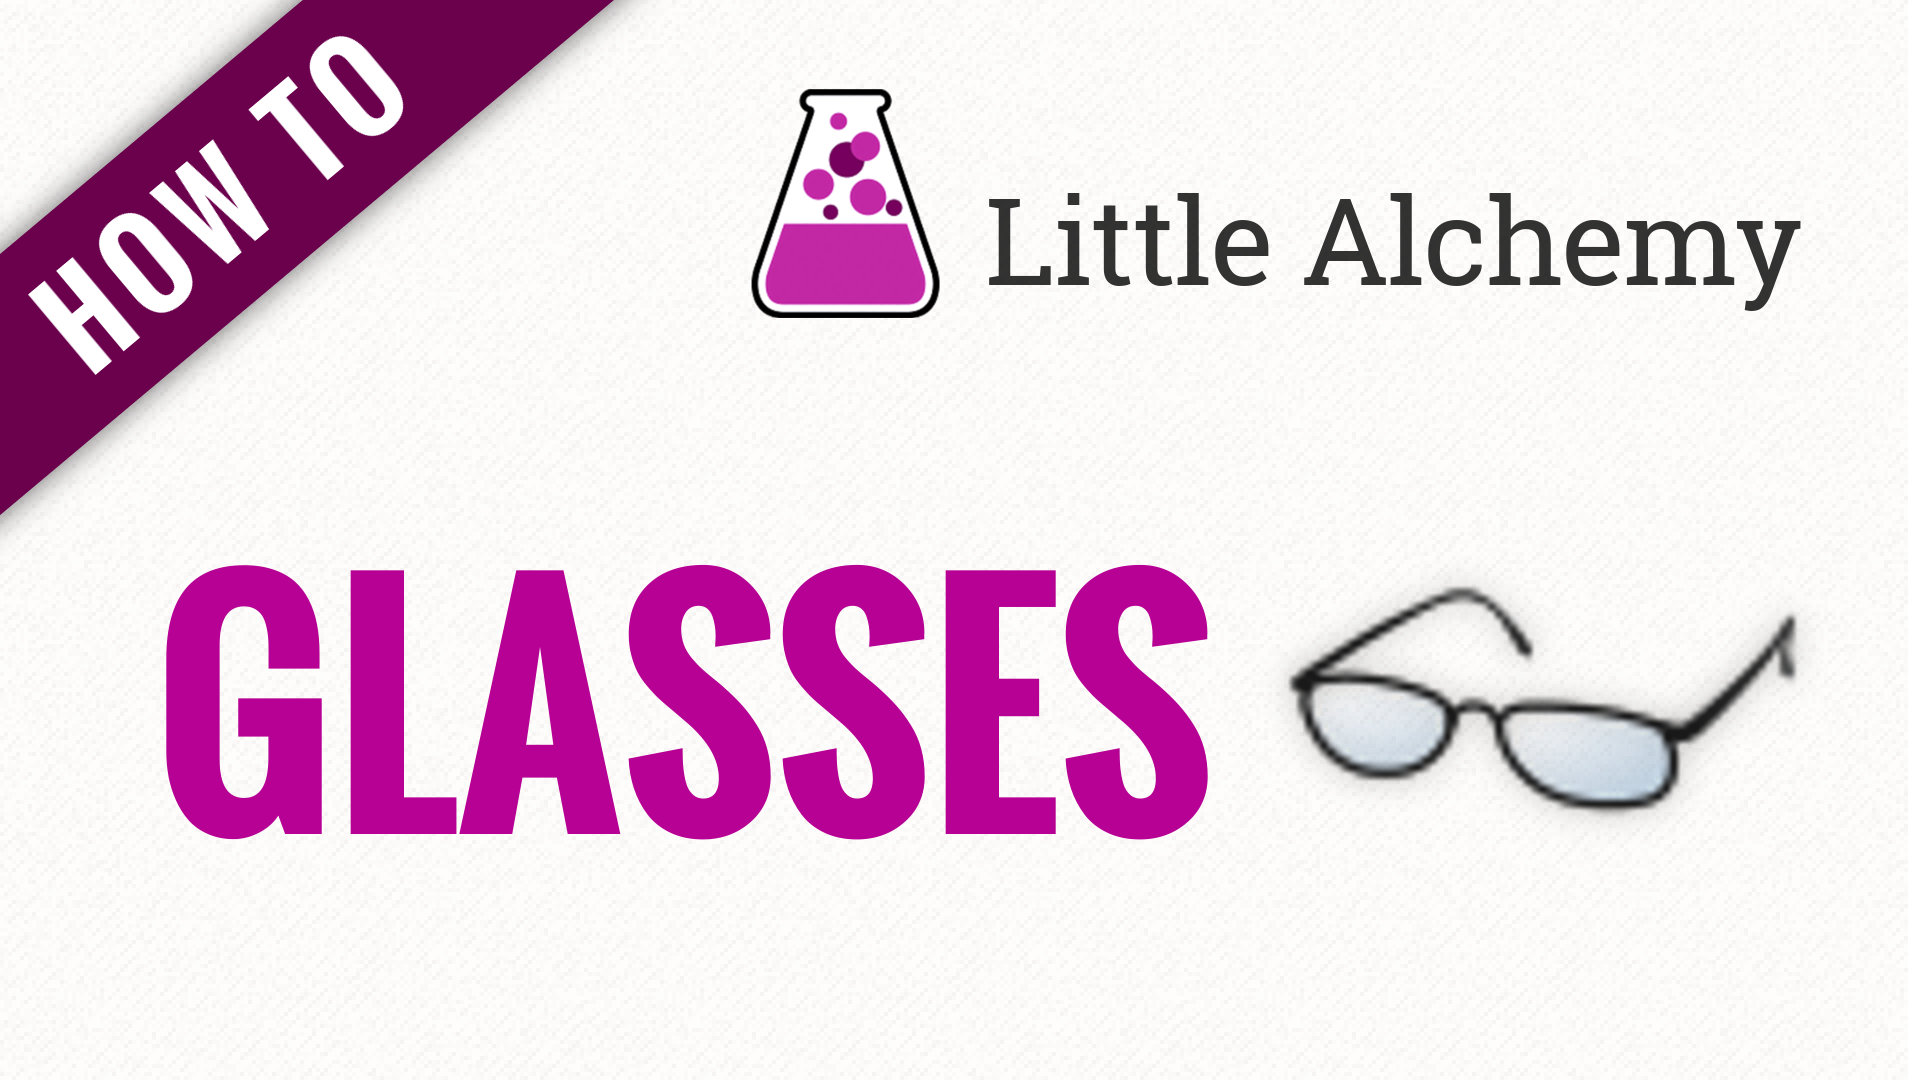 How To Make Glasses In Little Alchemy